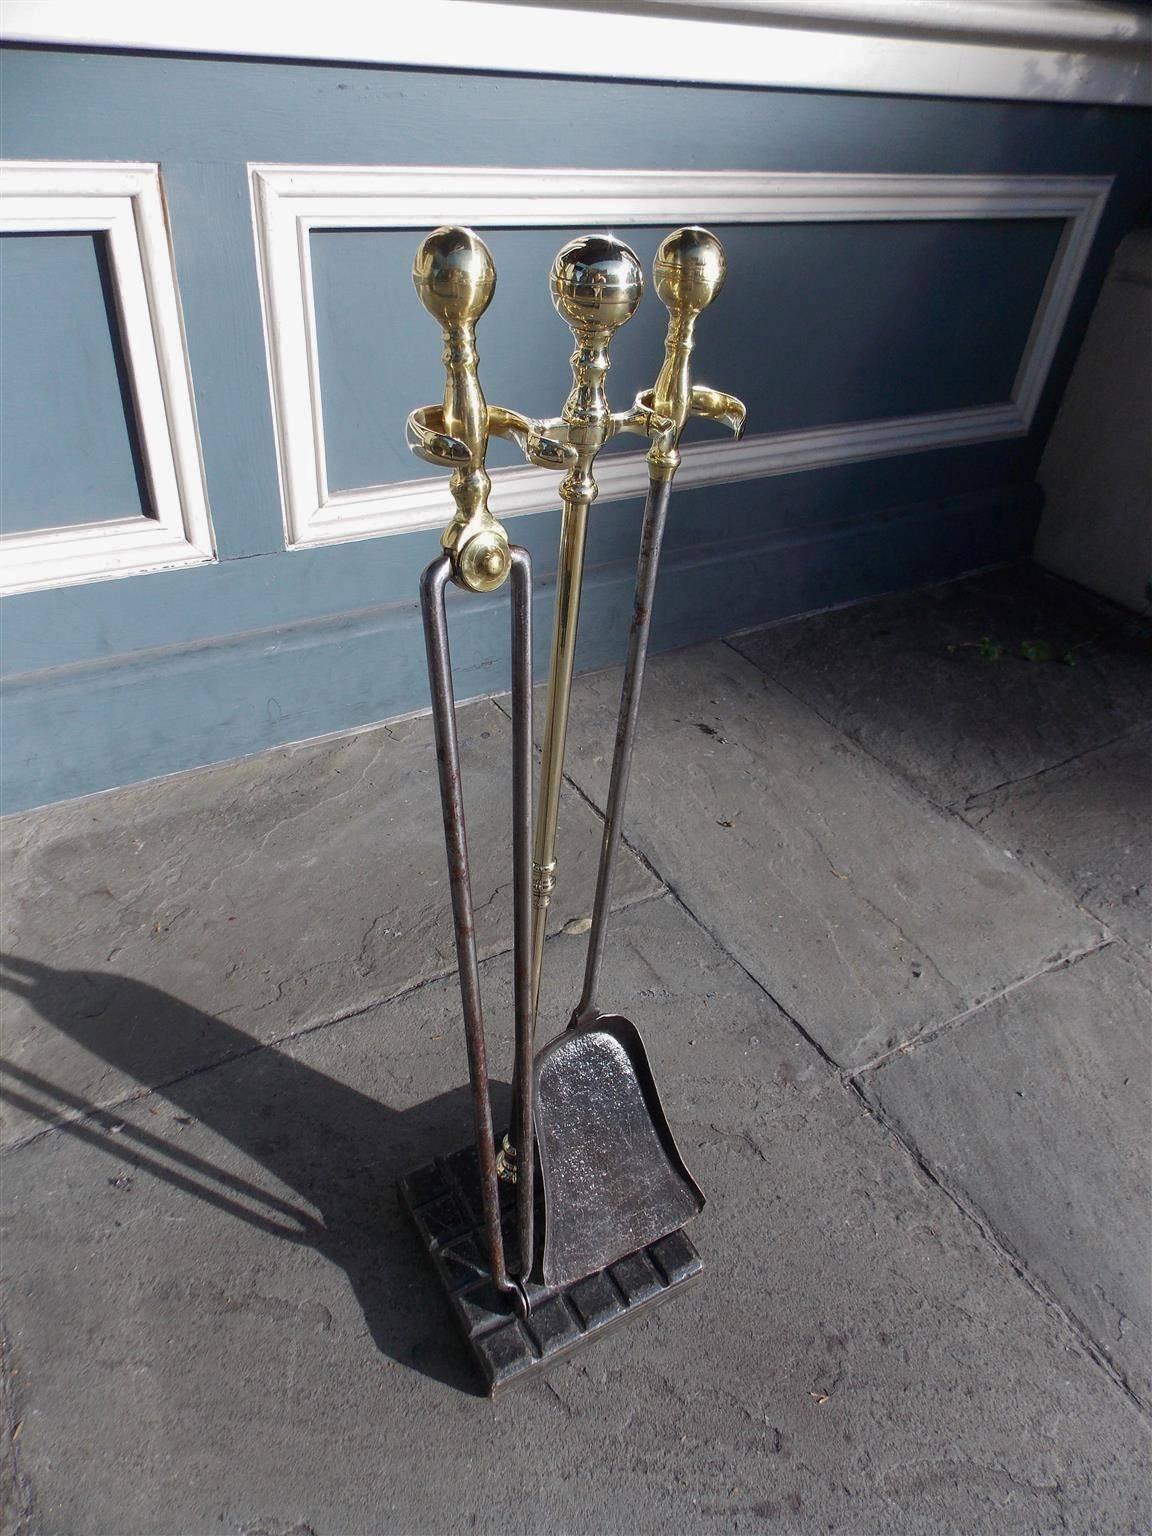 Set of American brass and polished steel fire tools on stand with brass ball turned ribbed finials, a matching ball finial jamb hook, polished steel shafts, and resting on a squared marble gouged base. Set consist of tong and shovel. Early 19th